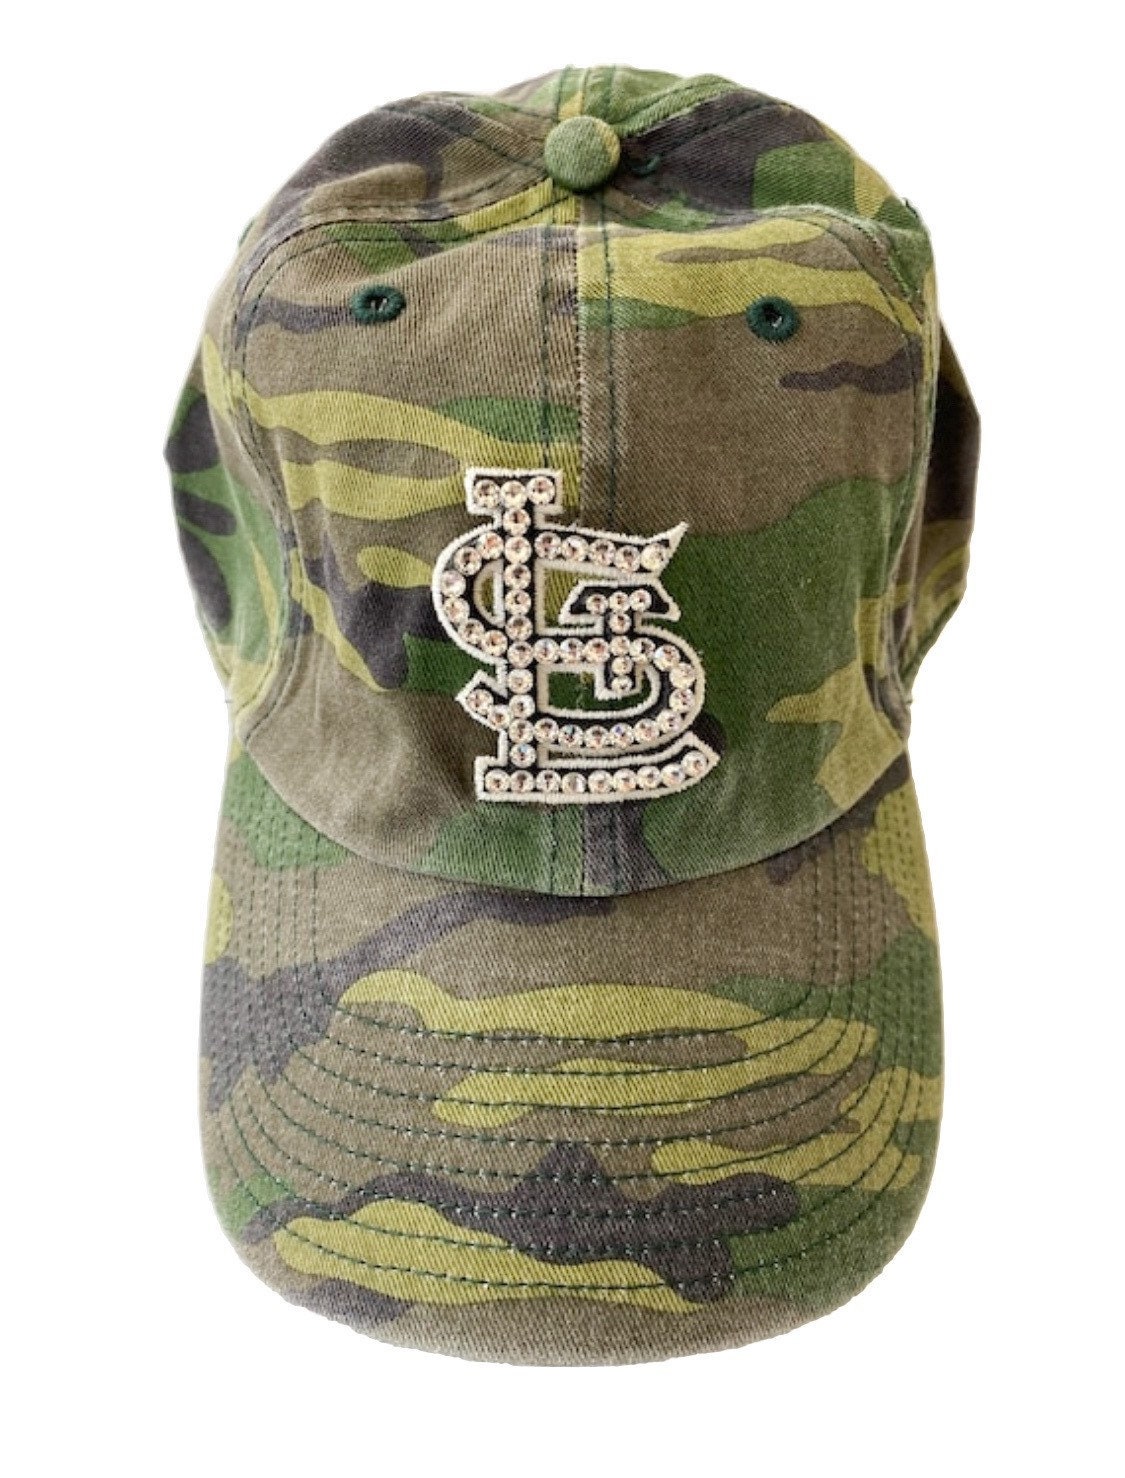 Classic Camo STL Bling Baseball Hat w/Red crystals – J.A. Whitney